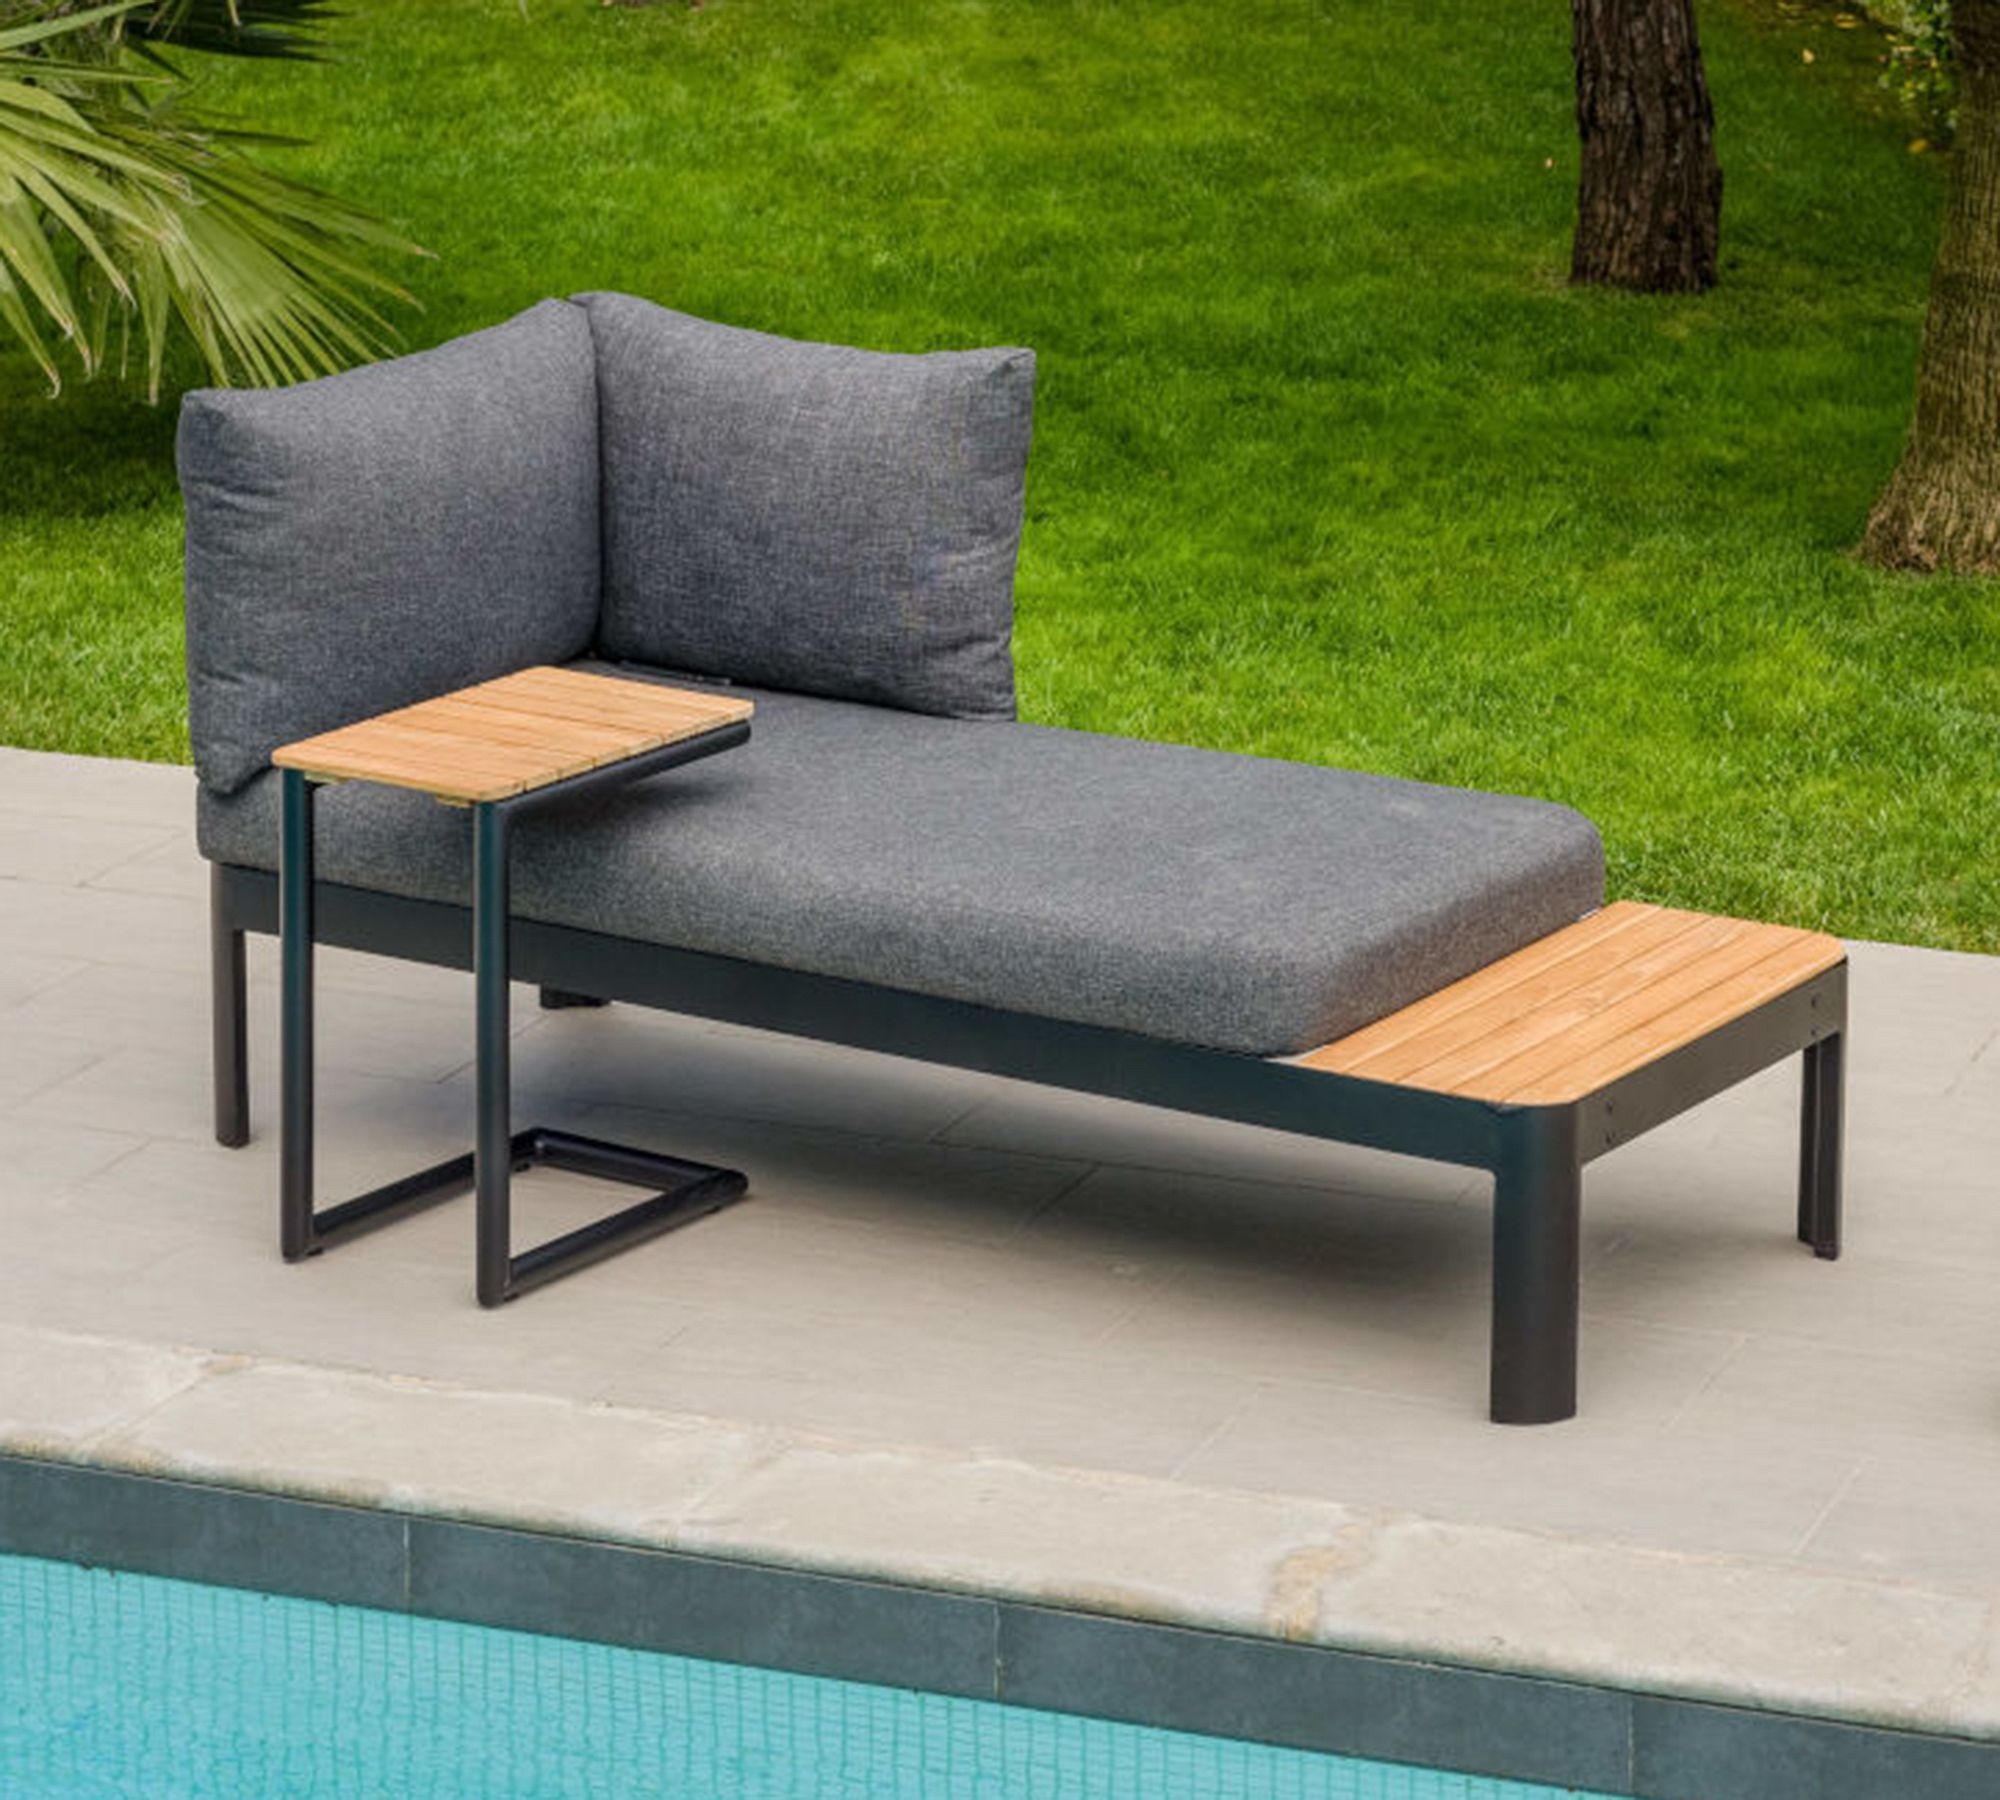 Chattanooga Teak Outdoor Chaise Lounge